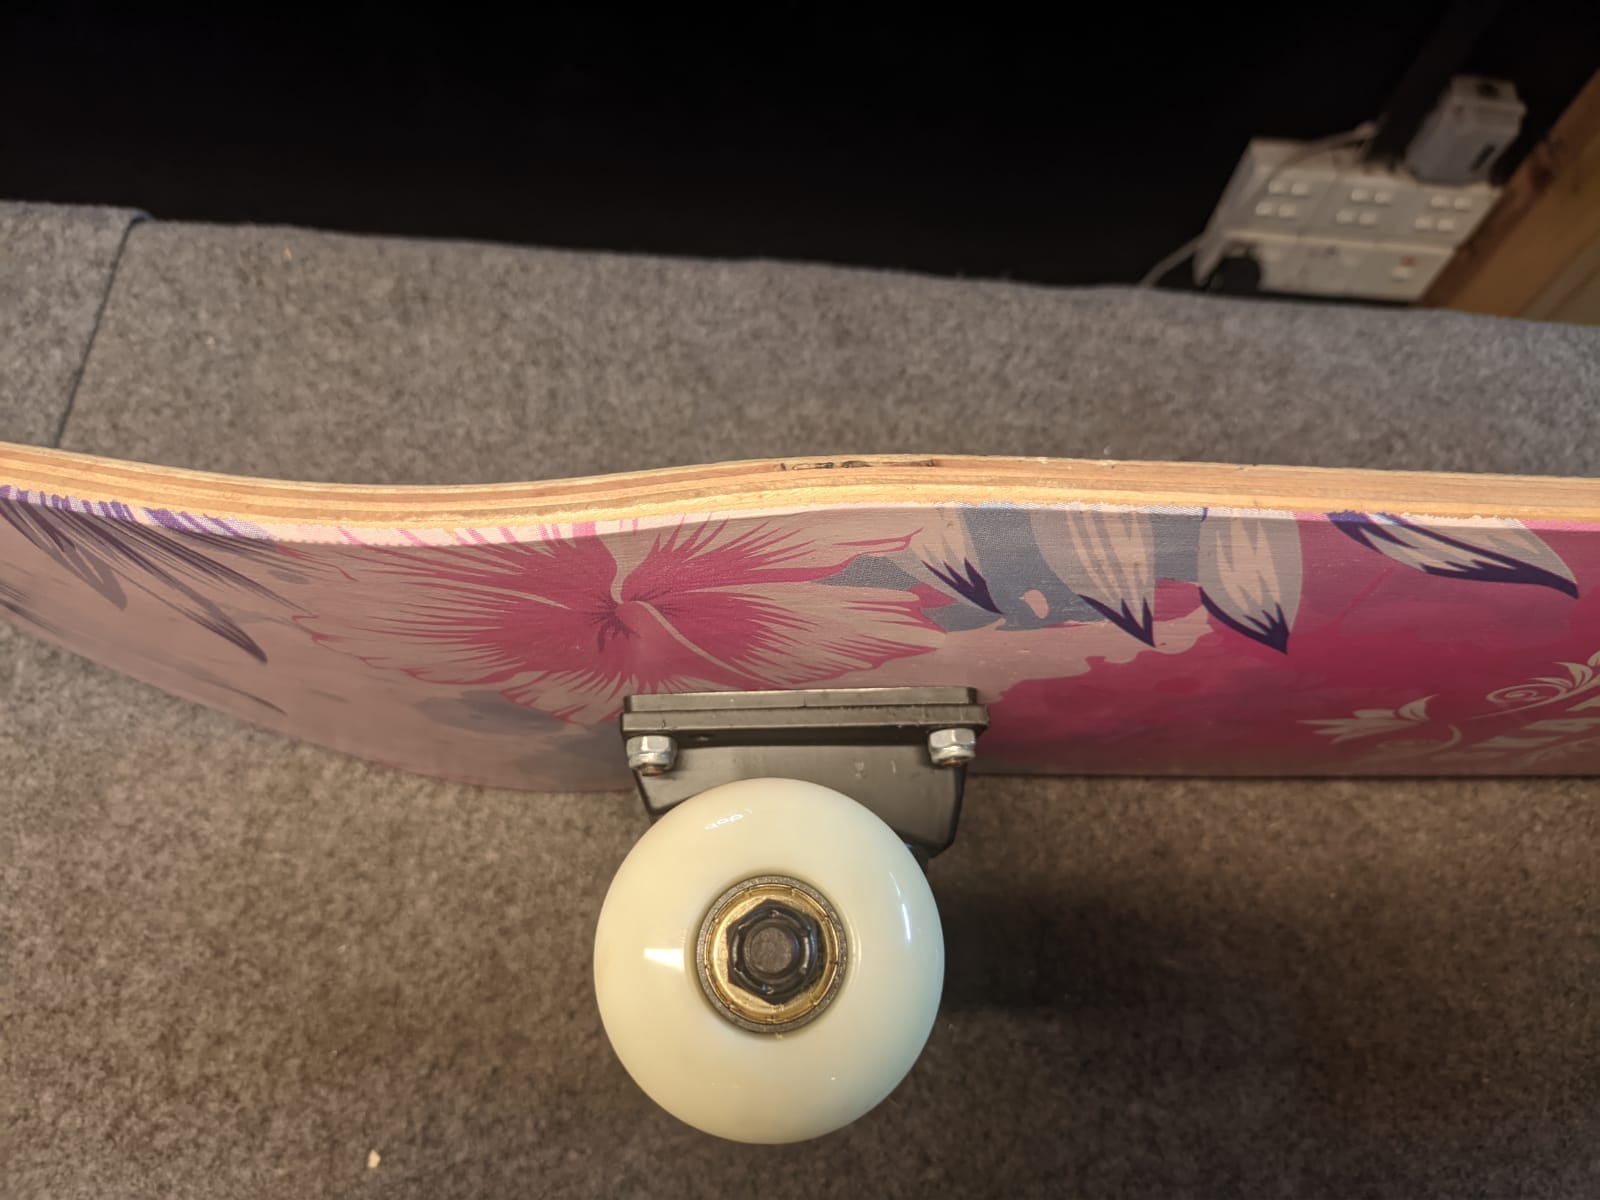 The wheels of a skateboard are fixed in their position.